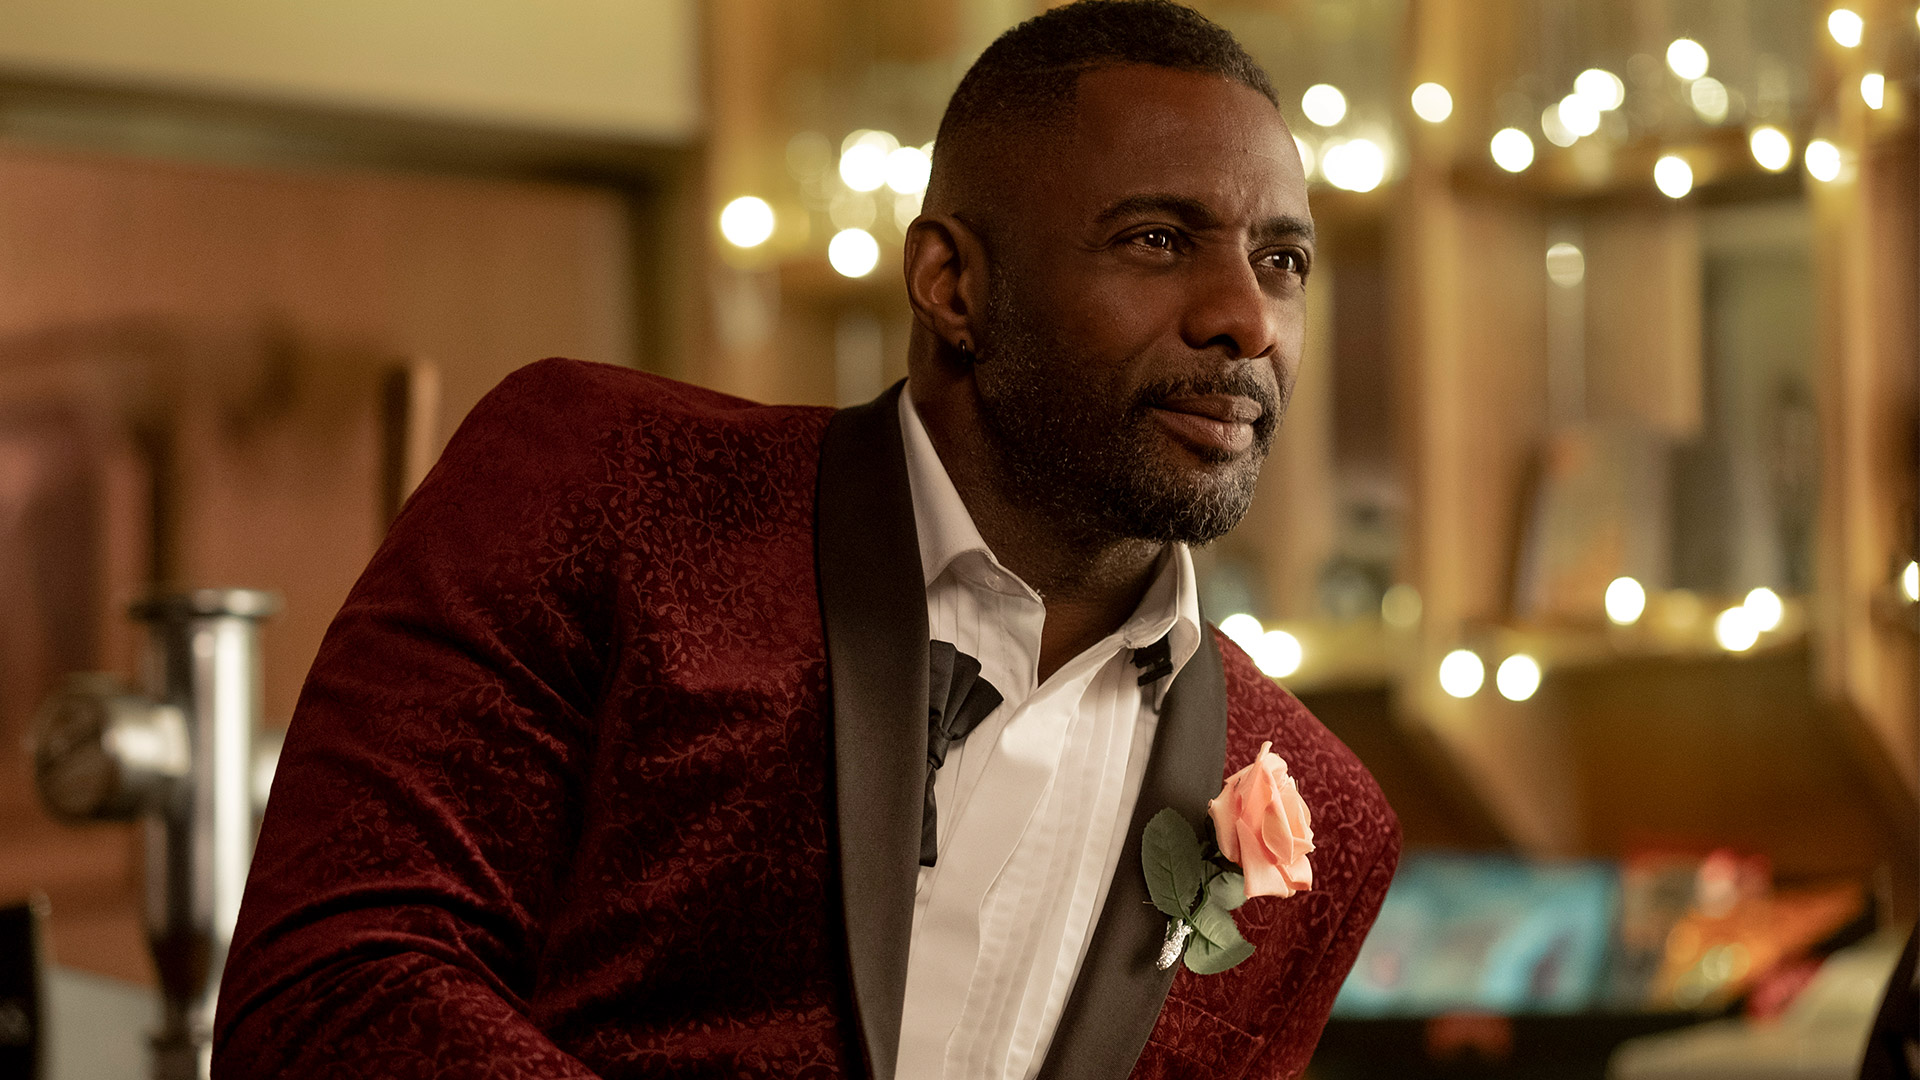 Idris Elba Is Going to Be in the Next Bond Film, With A Twist